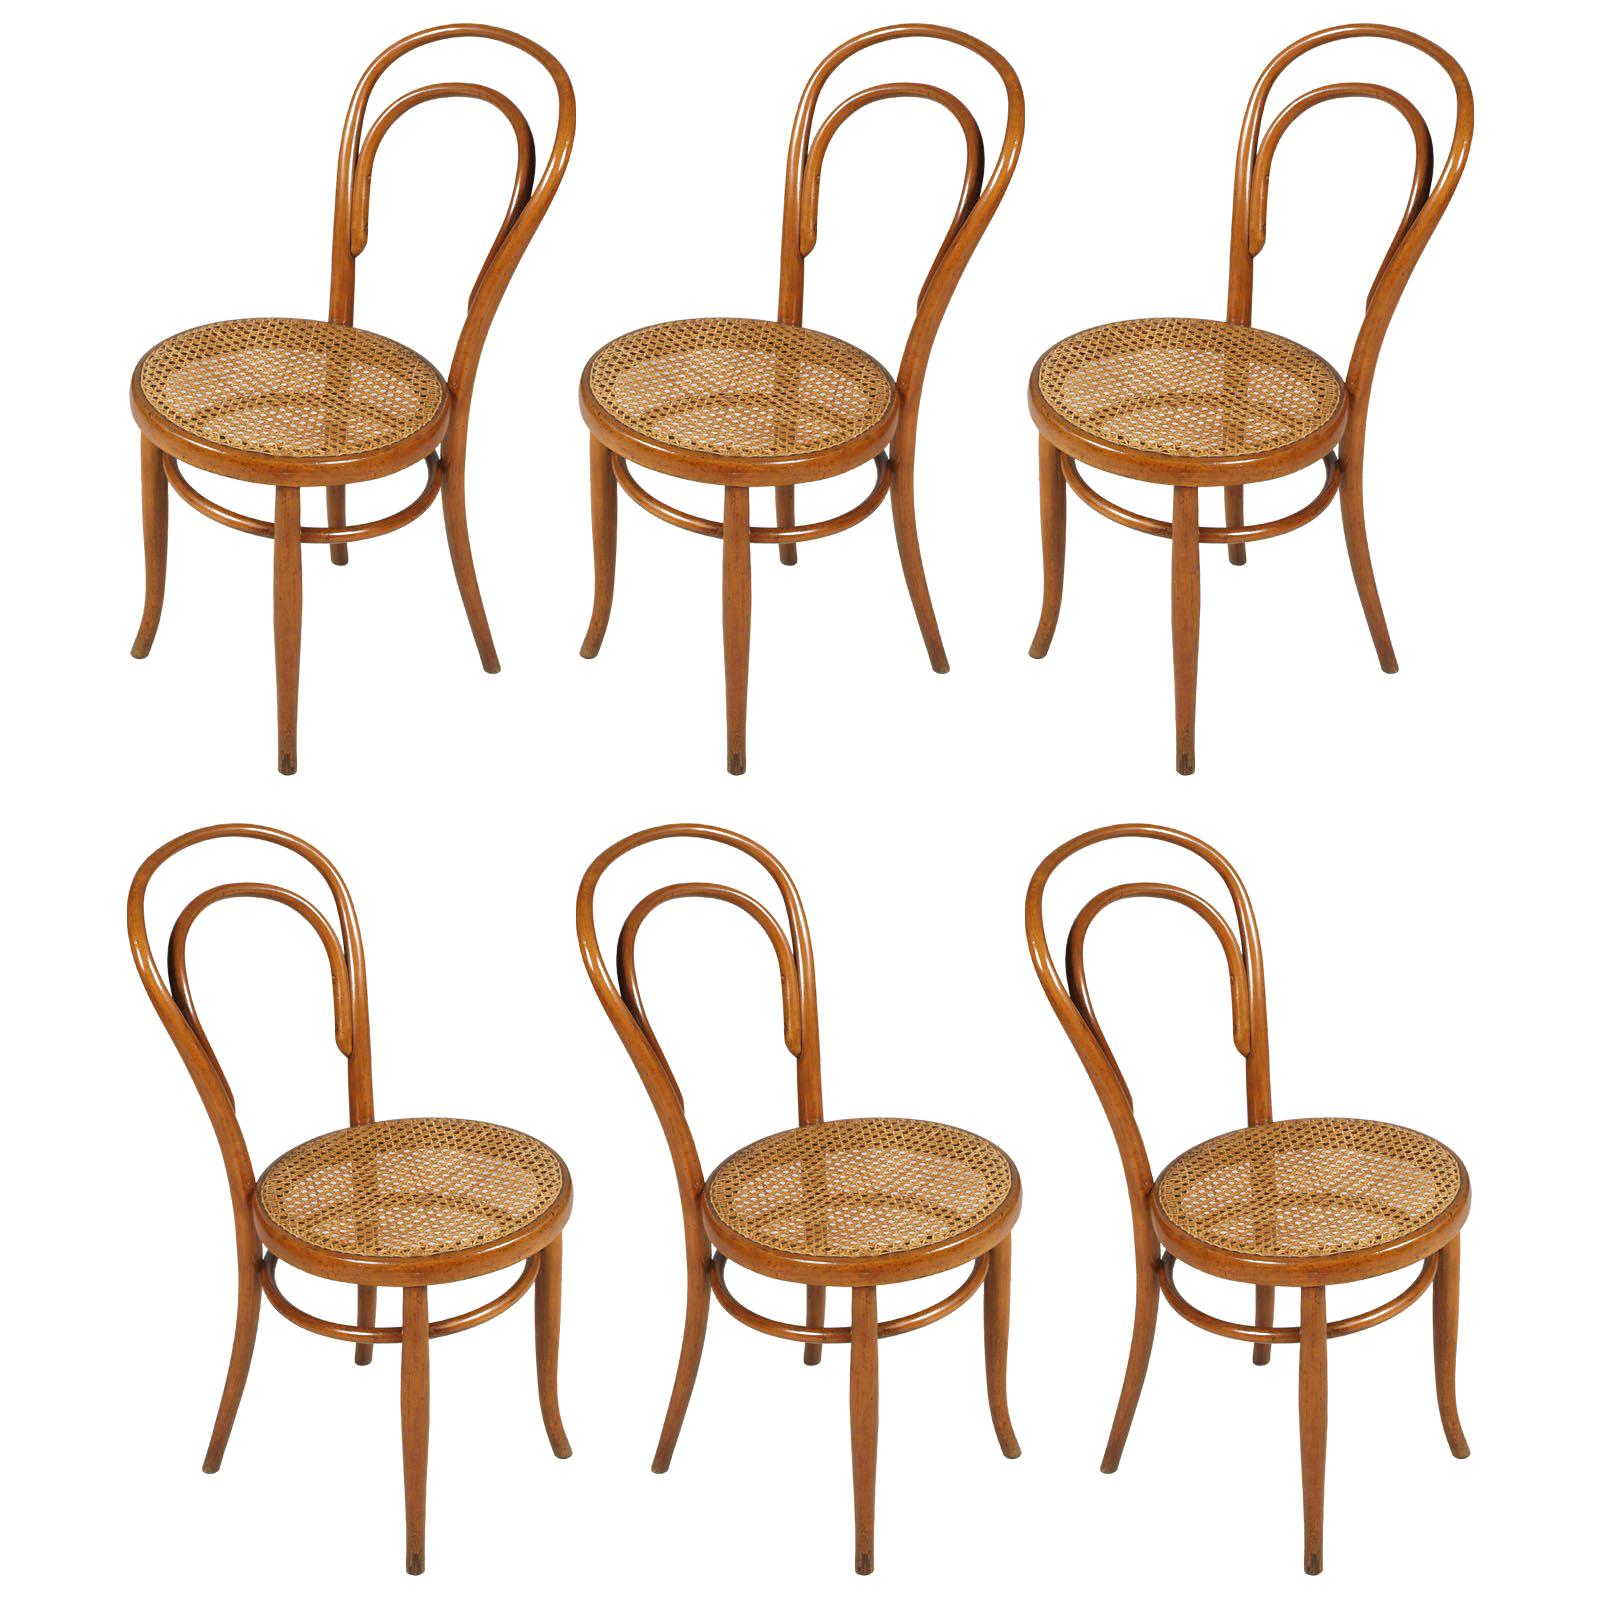 Six Chairs Model 14 by Thonet, Designed Mid-19th Century, Produced in the 1930s